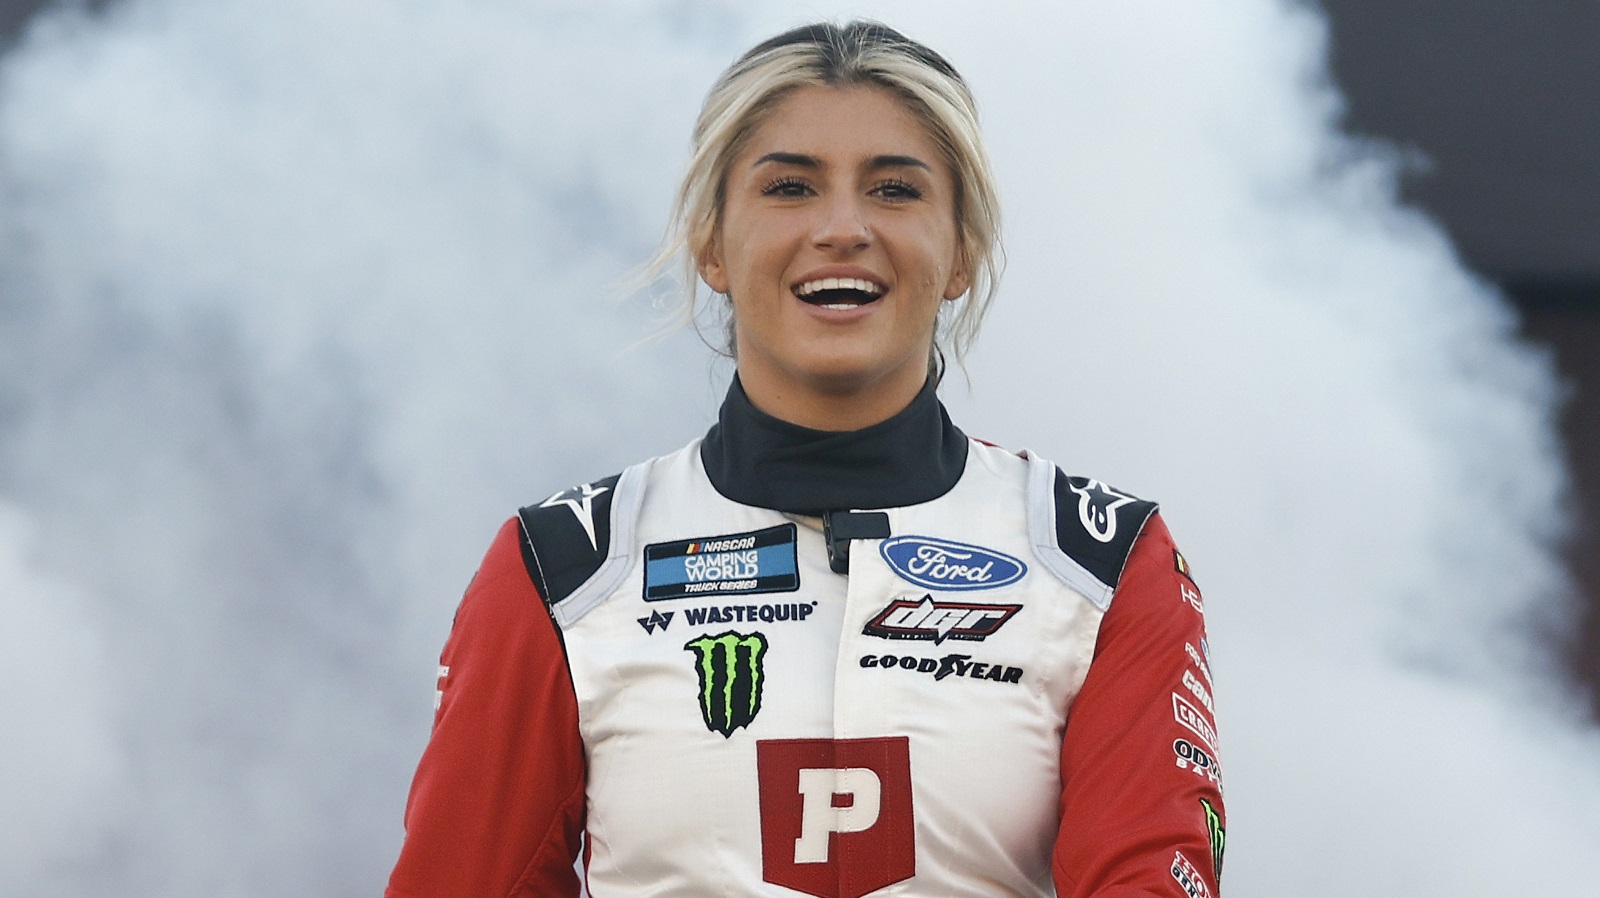 Hailie Deegan walks onstage during driver intros prior to the NASCAR Camping World Truck Series Worldwide Express 250 for Carrier Appreciation at Richmond Raceway on Aug. 13, 2022. | Chris Graythen/Getty Images